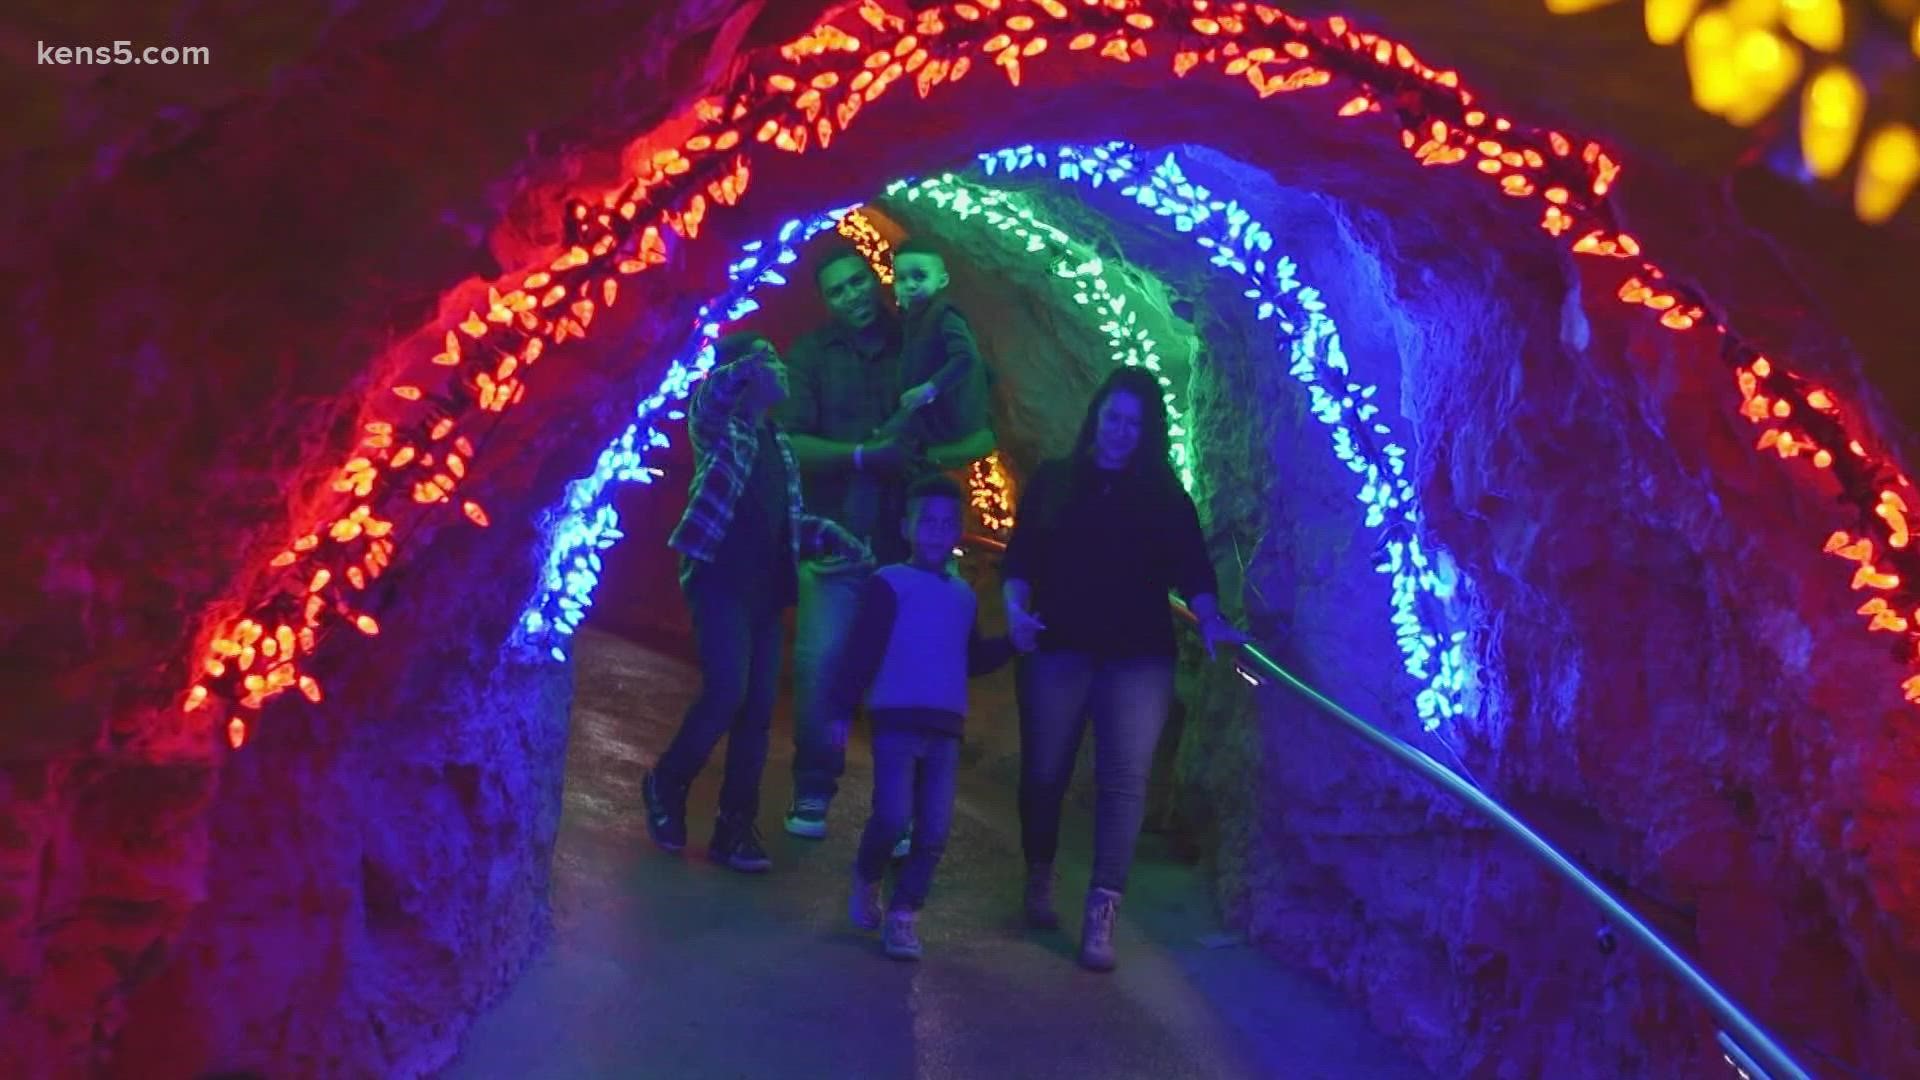 Natural Bridge Caverns is ready for Christmas at the Caverns in New